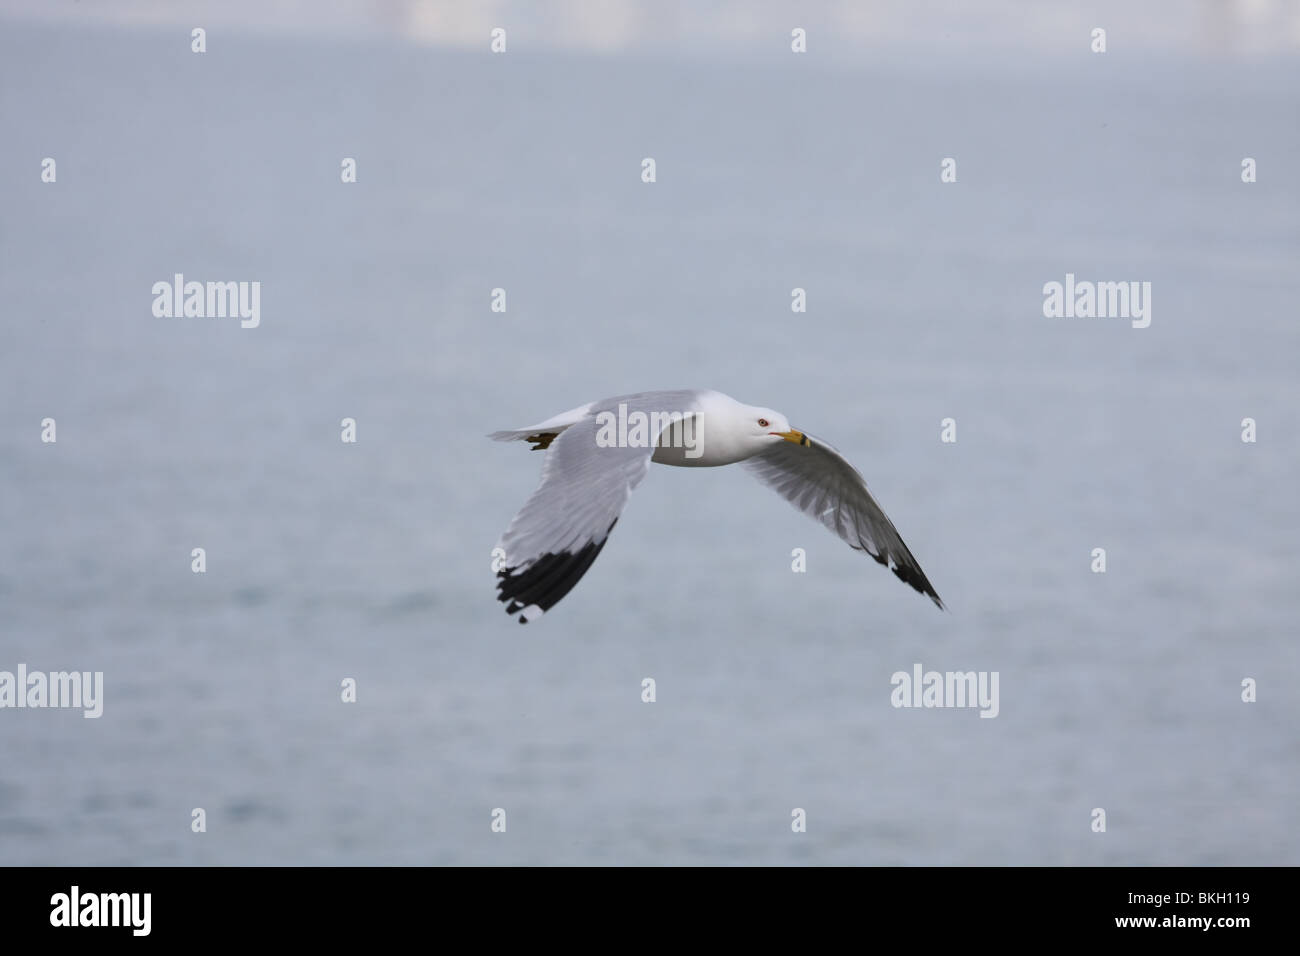 white grey seagull gull bird fly flying flight wing wings sky blue cloudy sunny larus Stock Photo